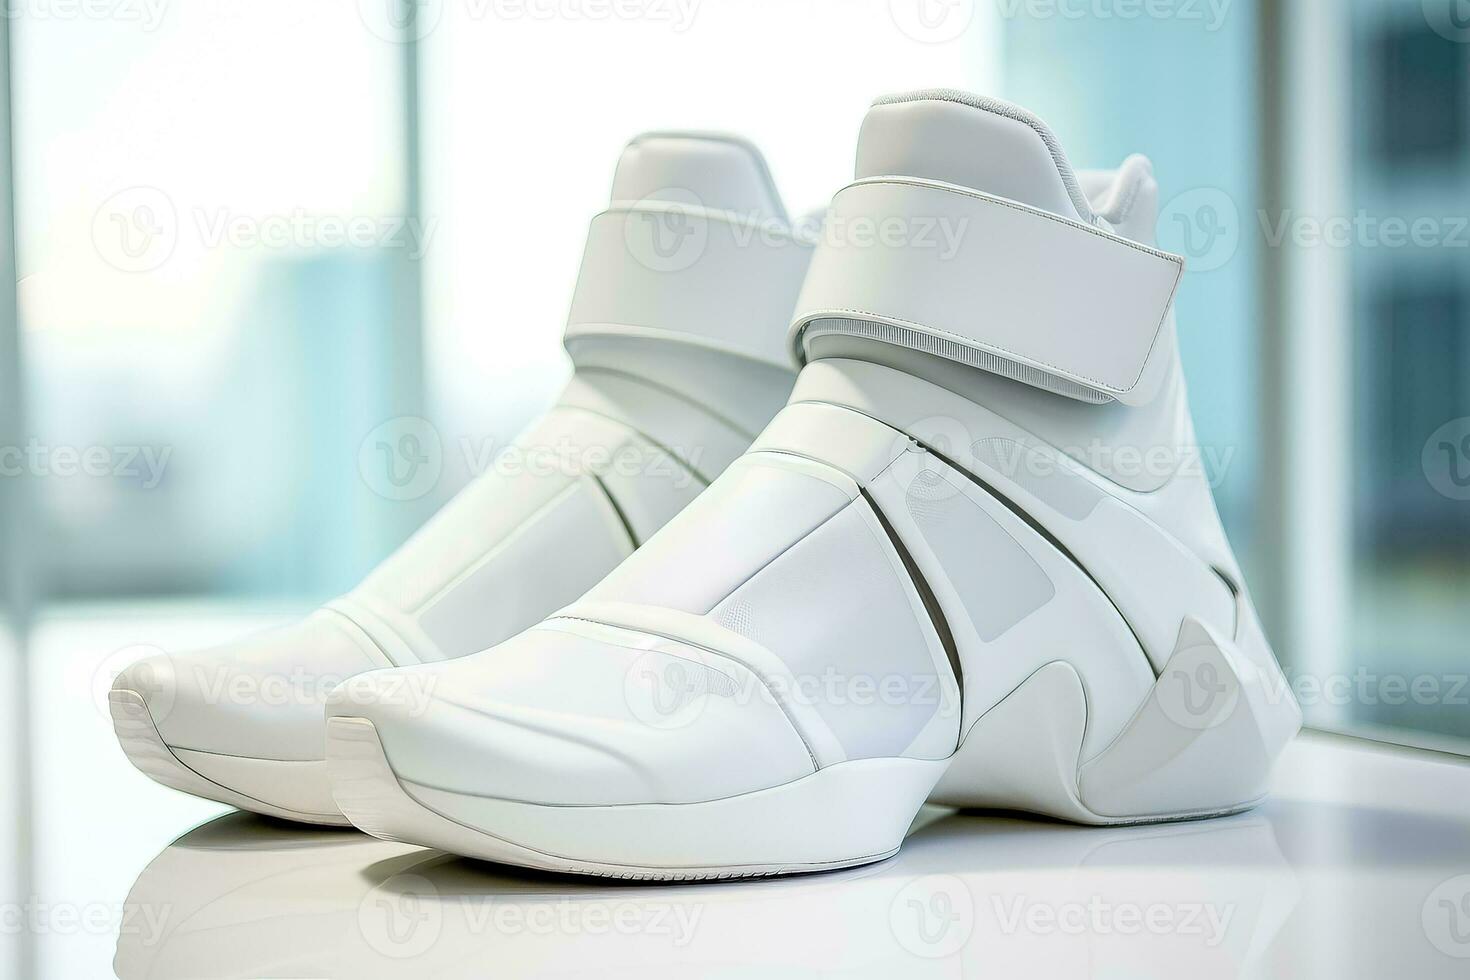 Modern design shoes that are white futuristic and trendy photo